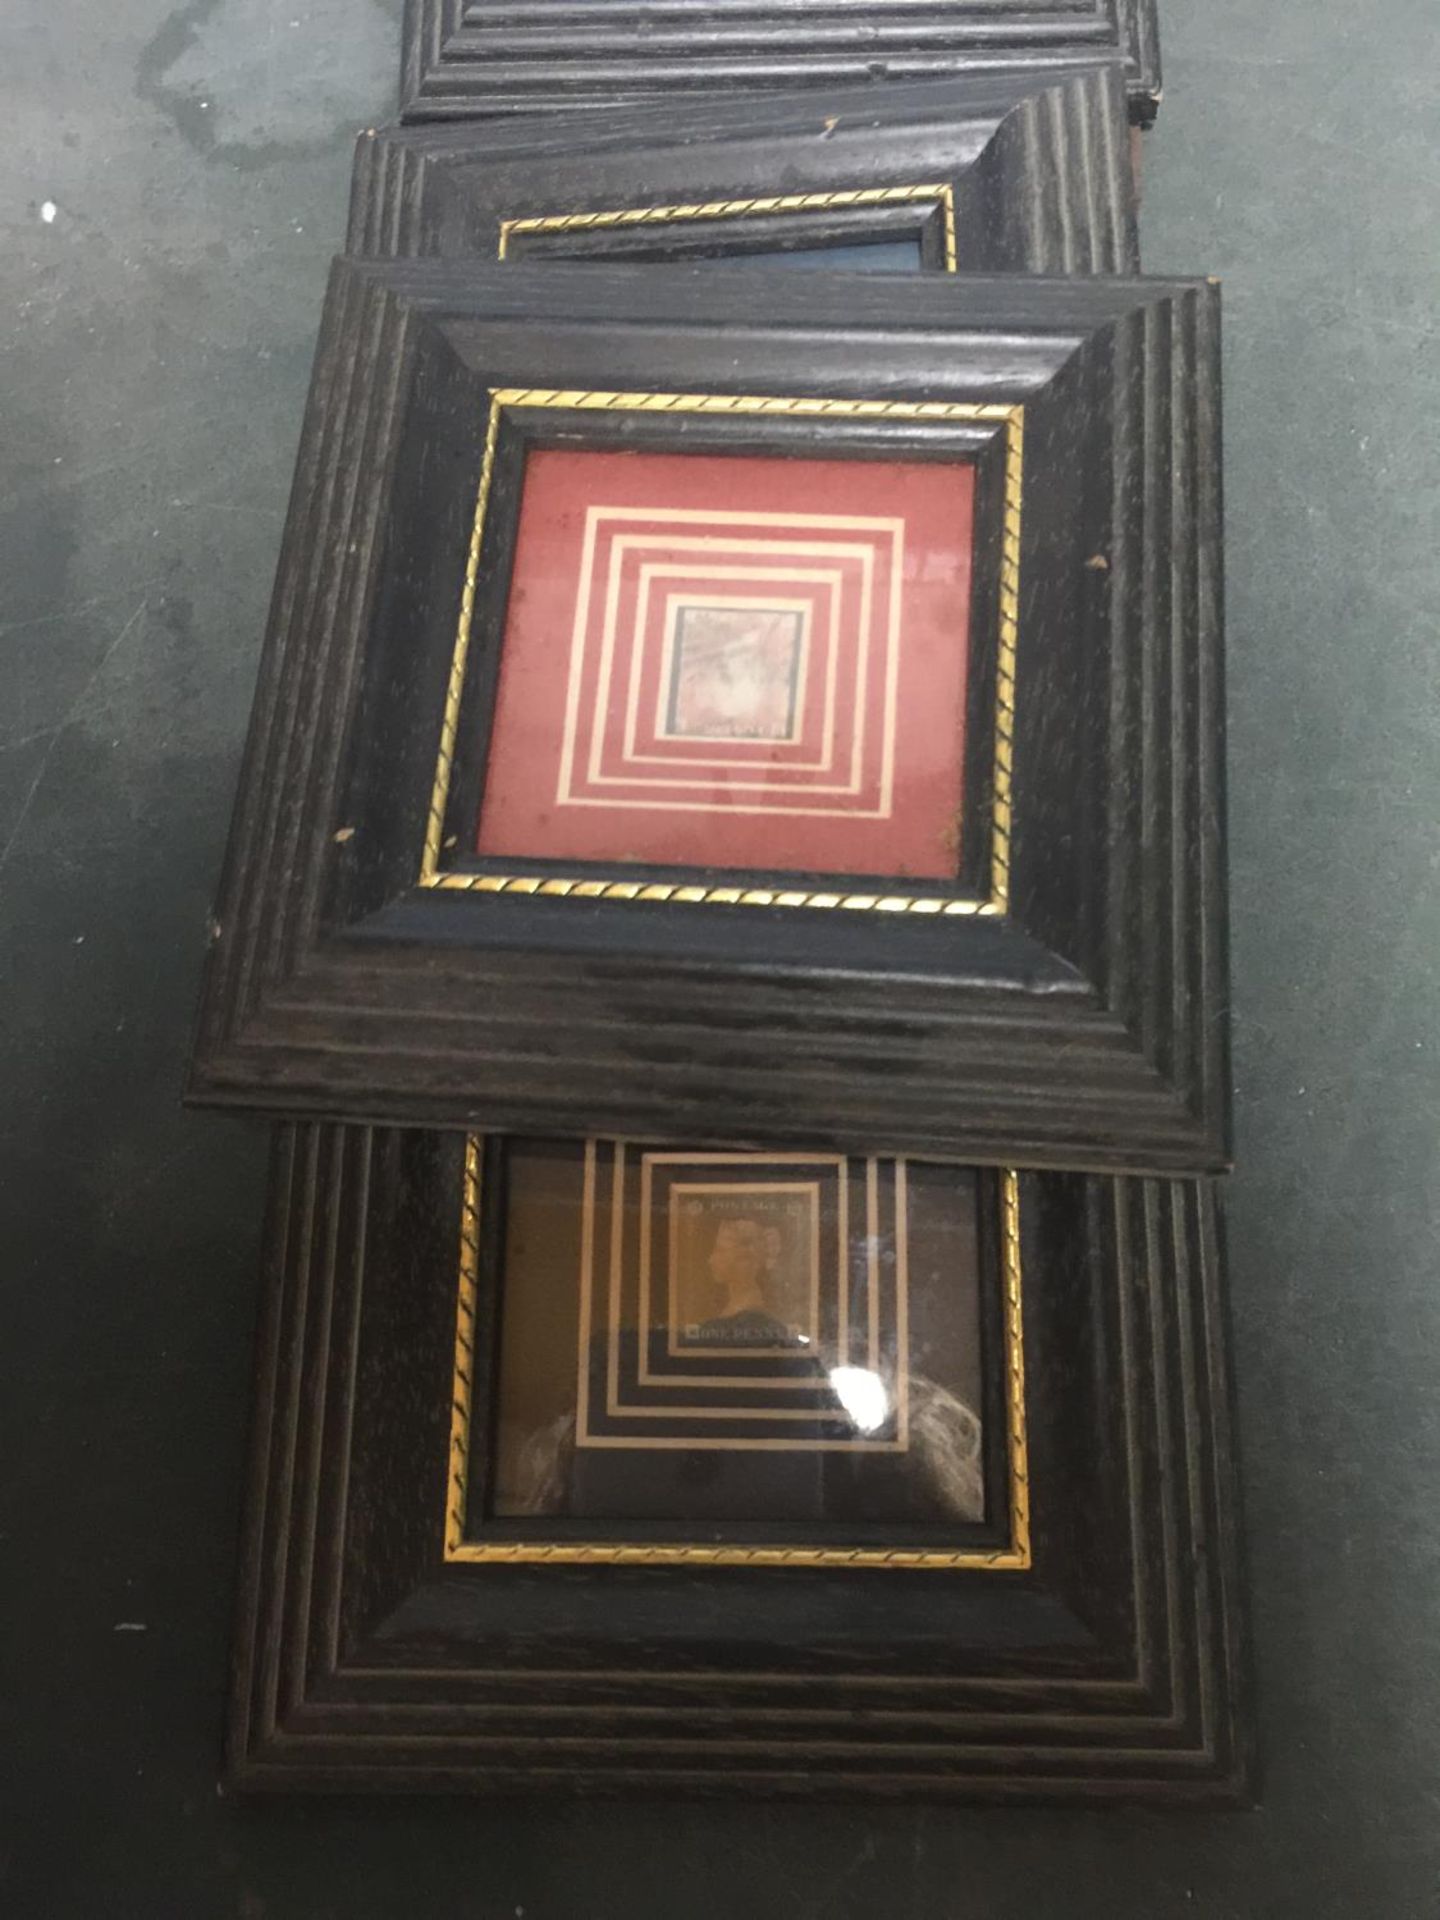 FOUR VINTAGE STAMPS IN FRAMES TO INCLUDE A PENNY BLACK, PENNY RED, TWO PENNY BLUE AND A PENNY PURPLE - Image 2 of 3